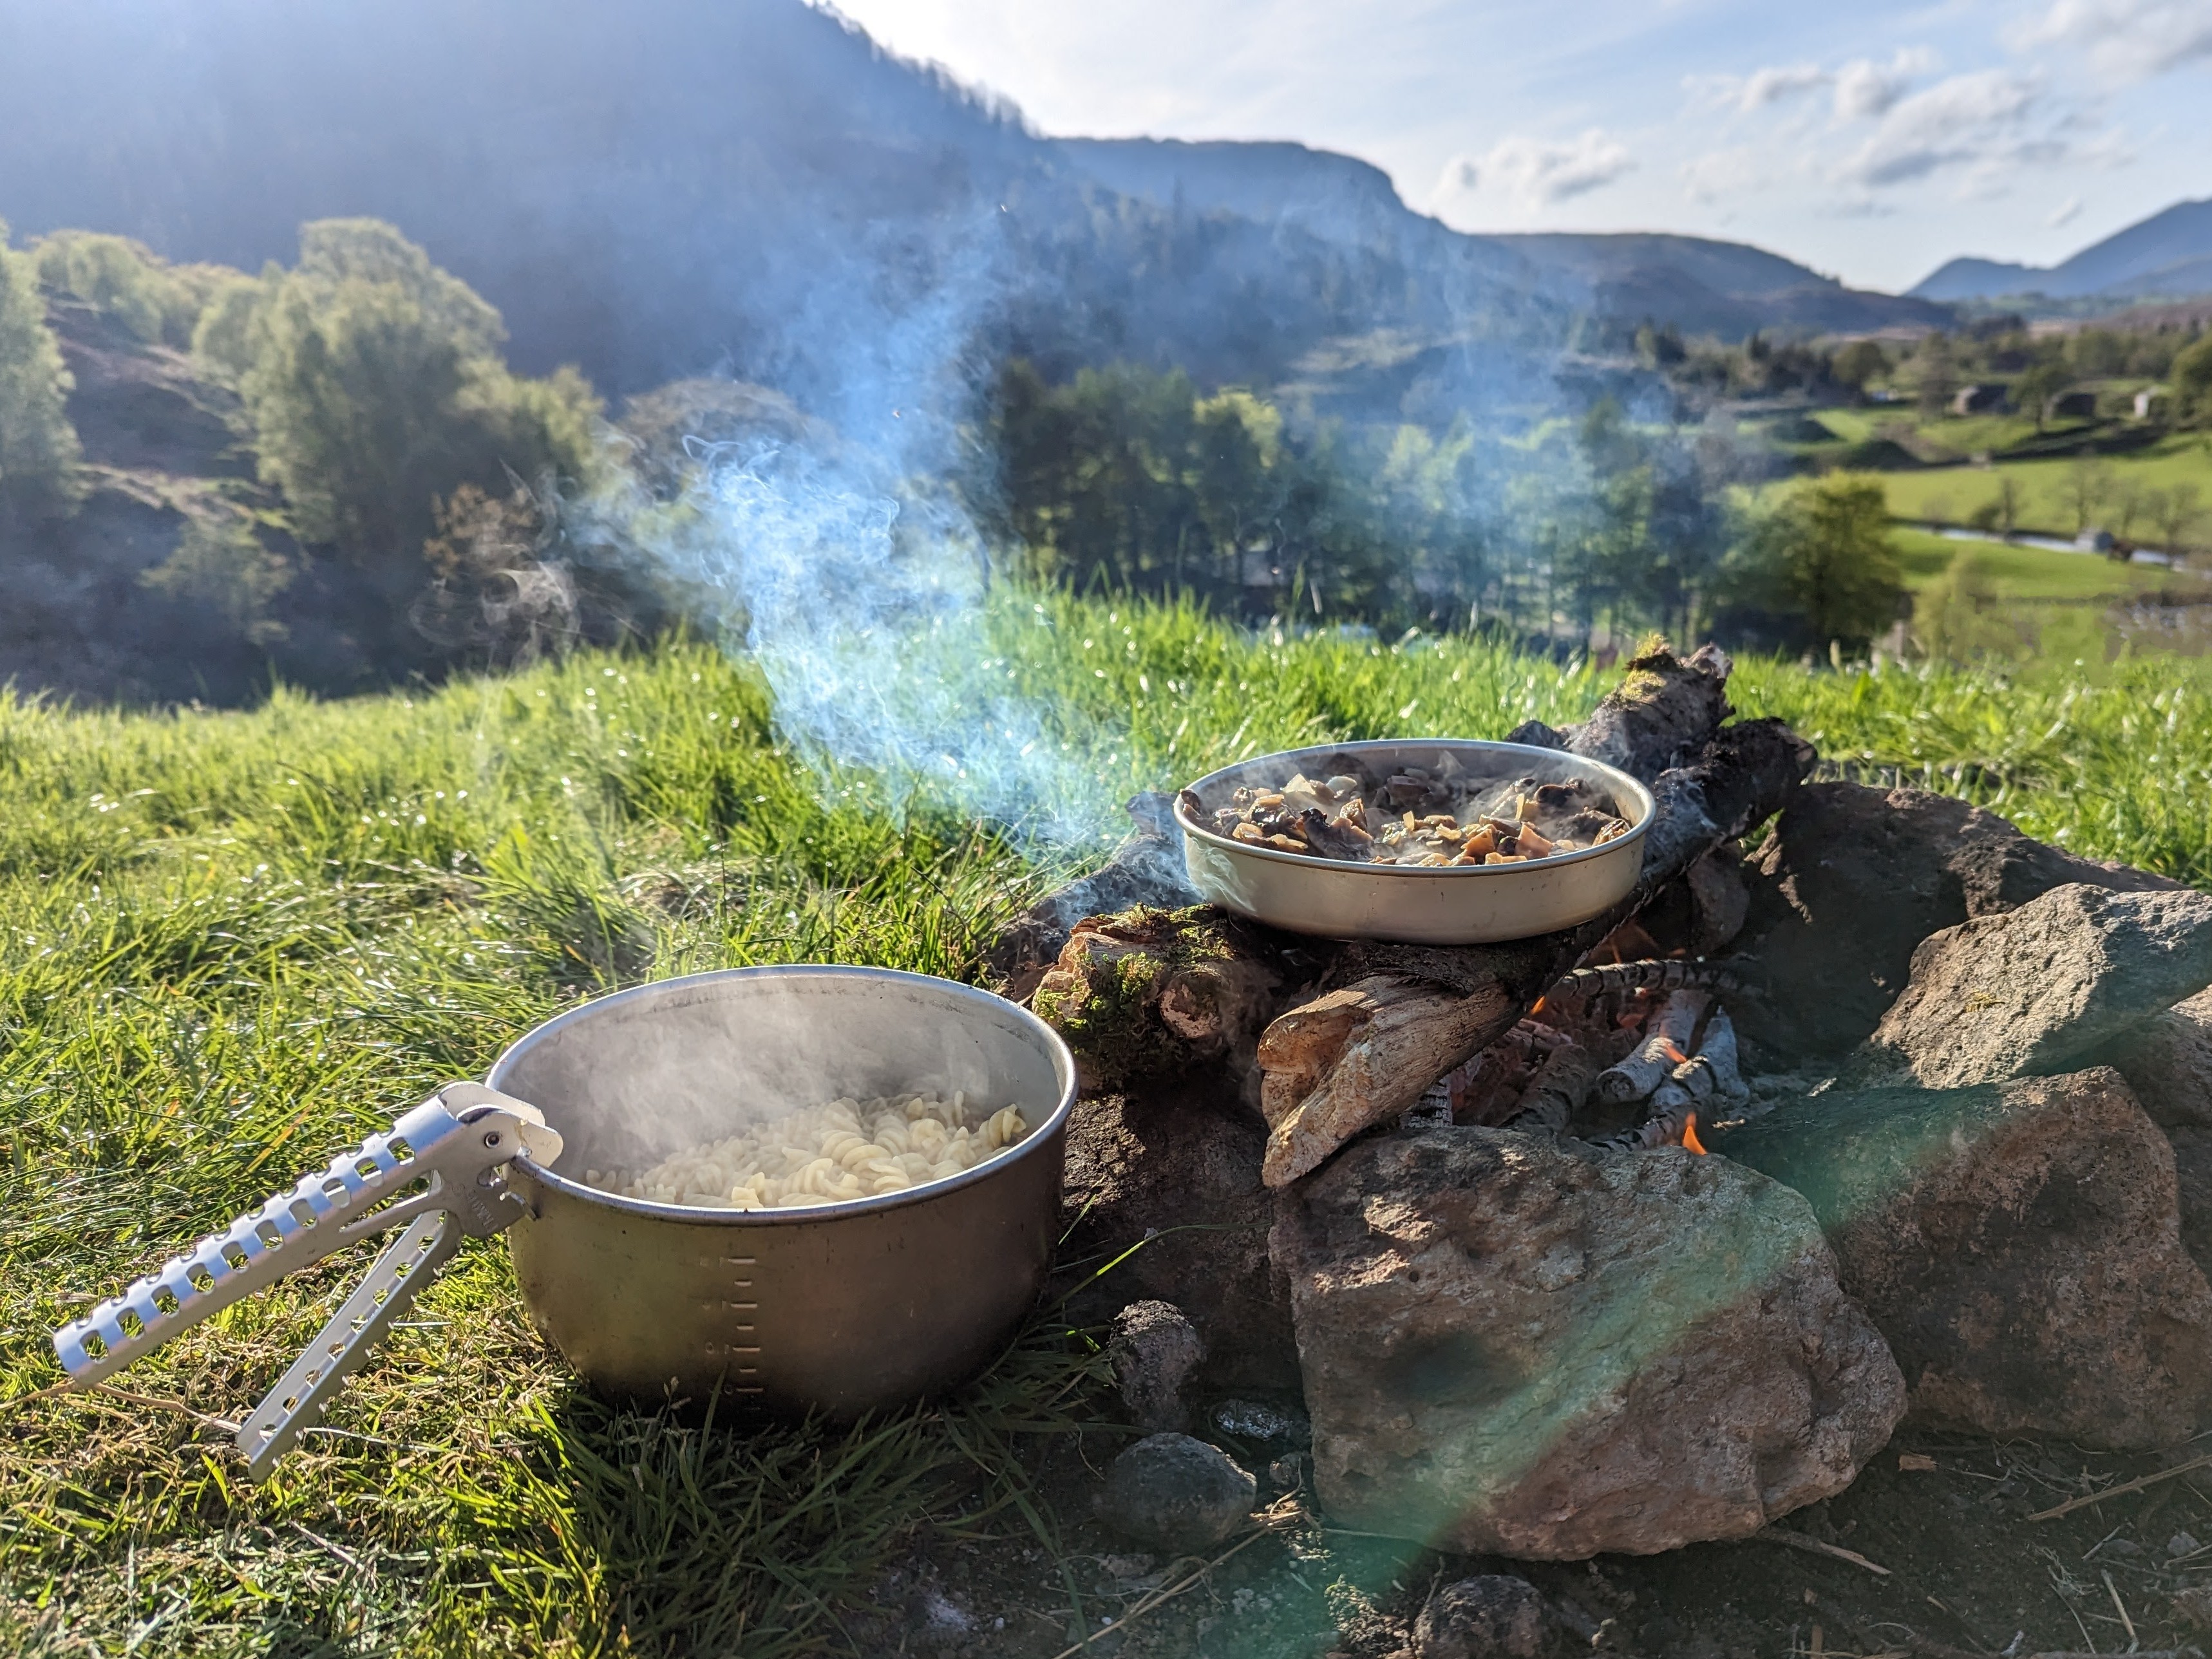 Cooking mushrooms and pasta on a campfire